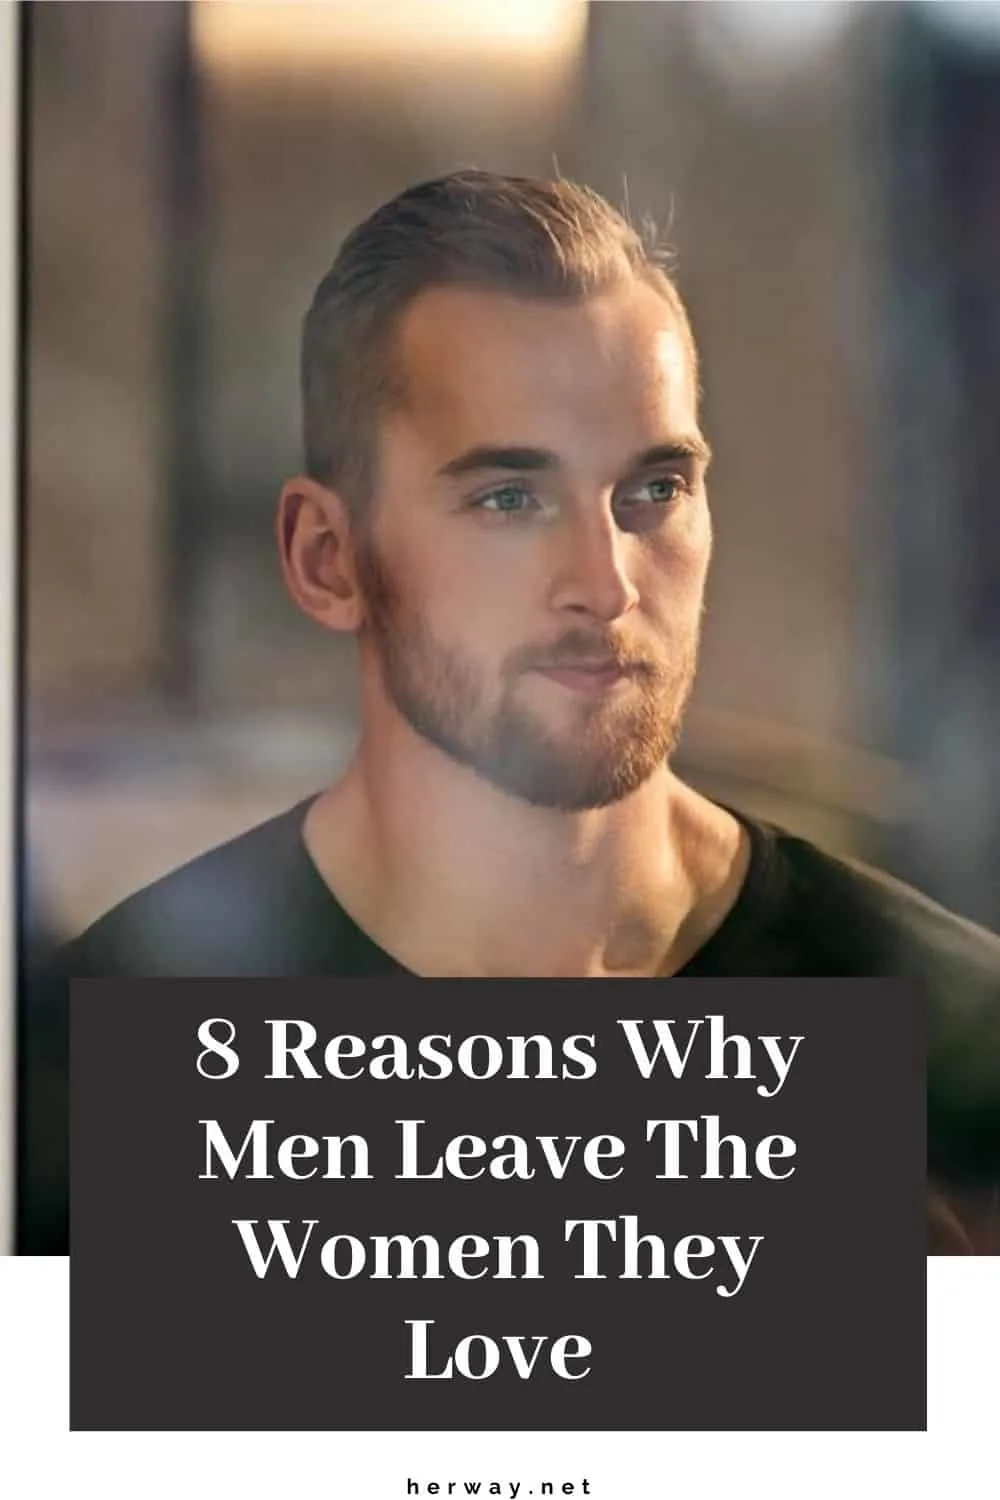 8 Reasons Why Men Leave The Women They Love